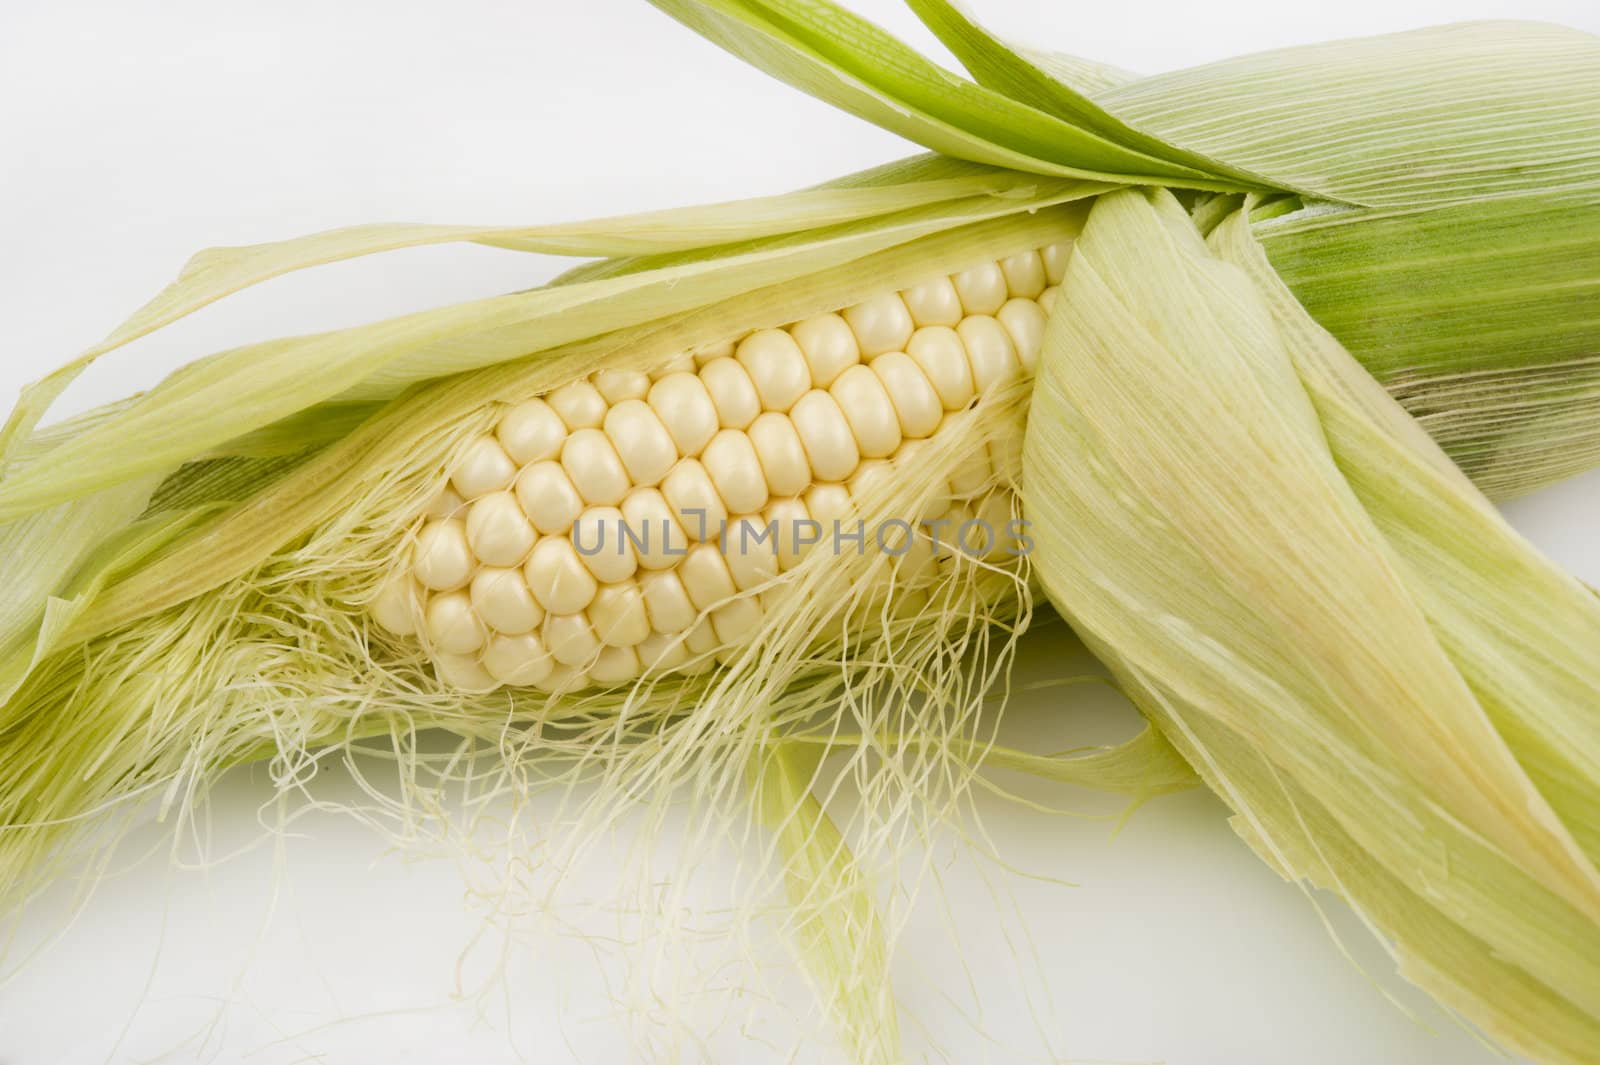 Close-up image of a partially shucked ear of corn